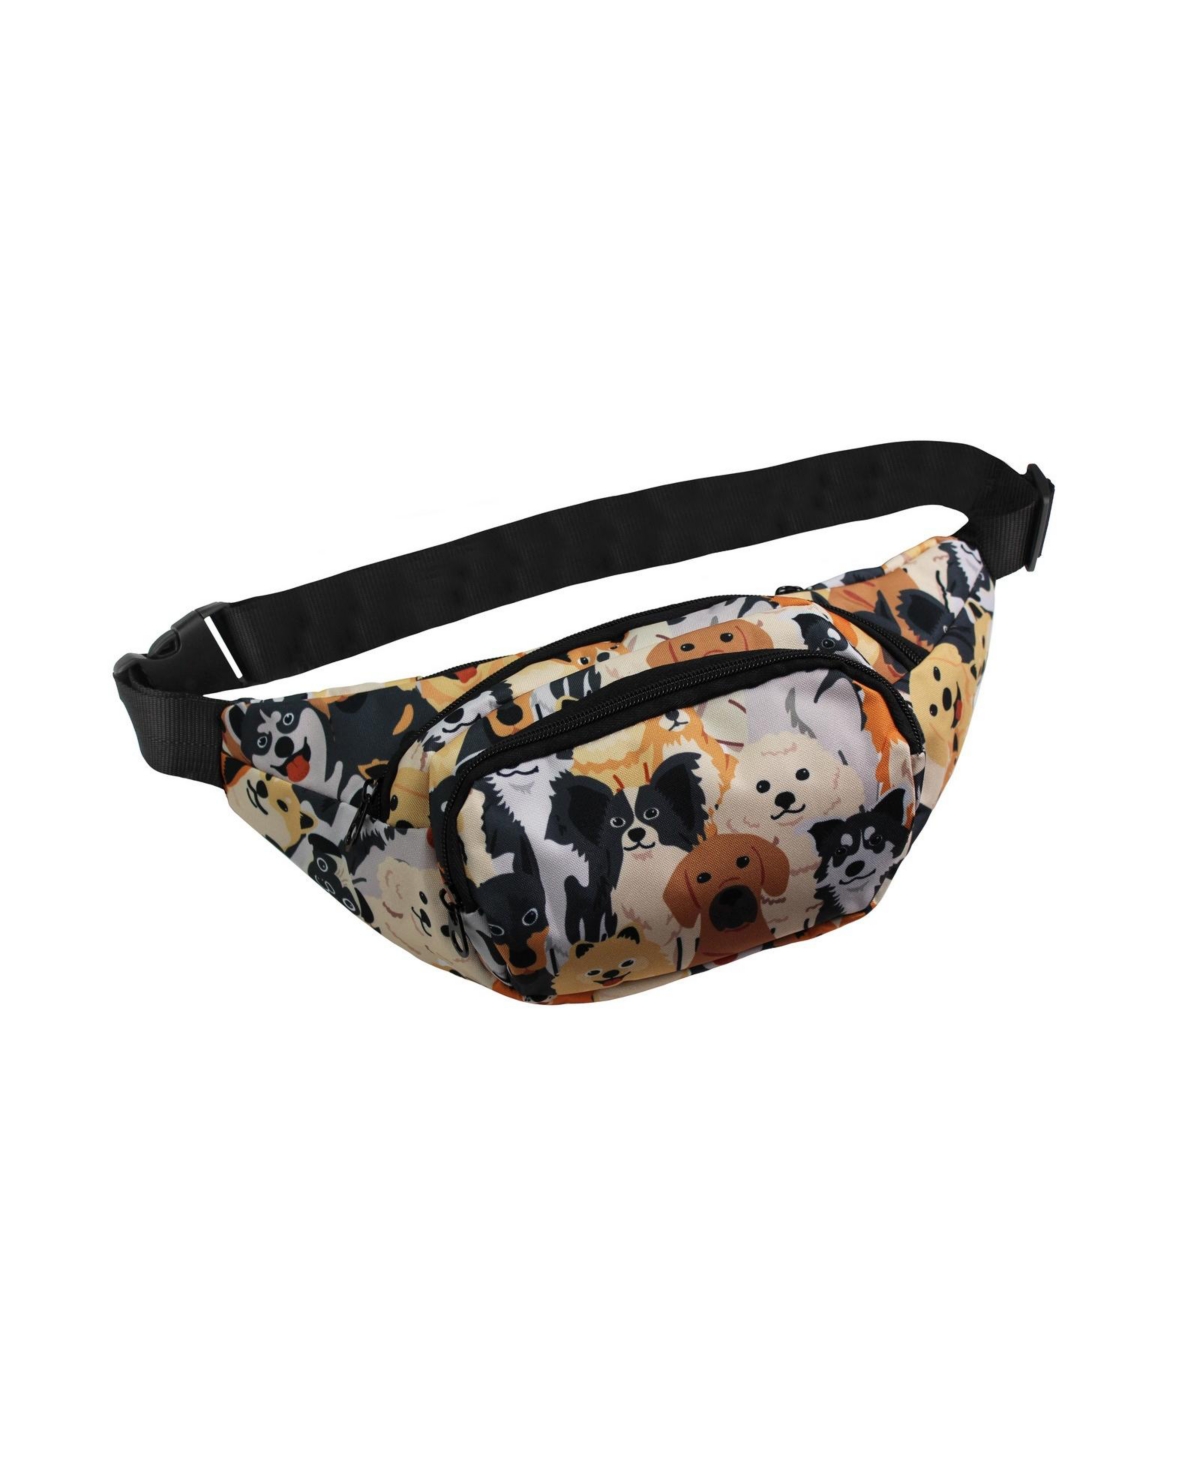 Dogs 14-Inch Fanny Pack Adjustable Crossbody Waist Pack - Dogs